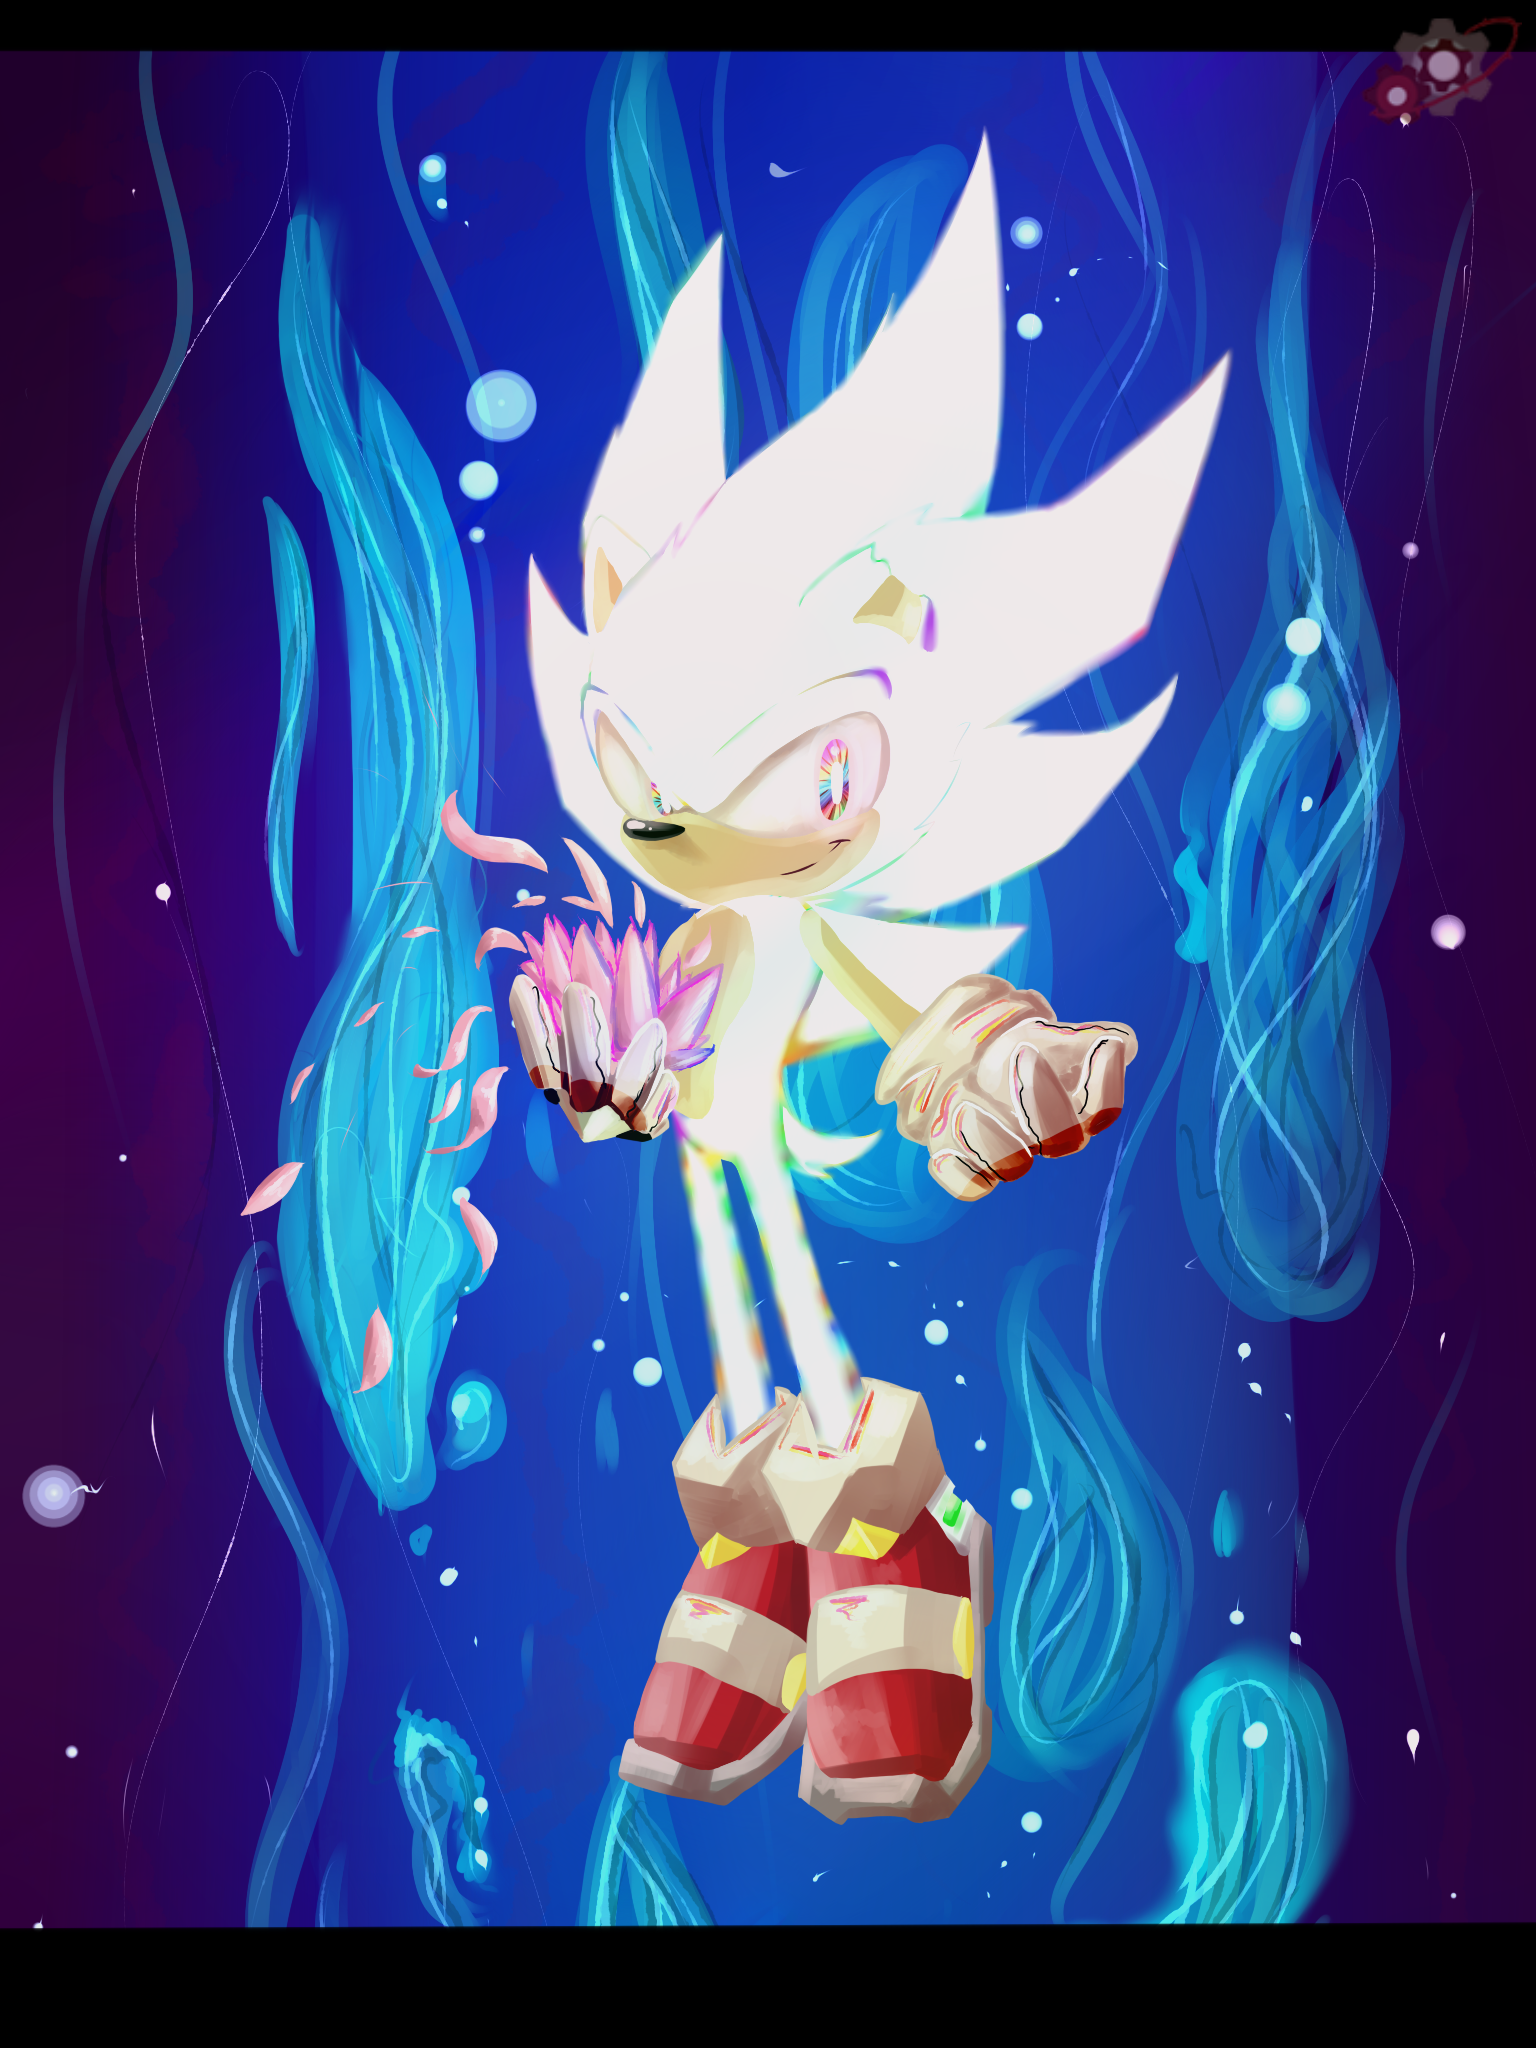 hyper_sonic_by_mechasvitch-d9s4lw5.png